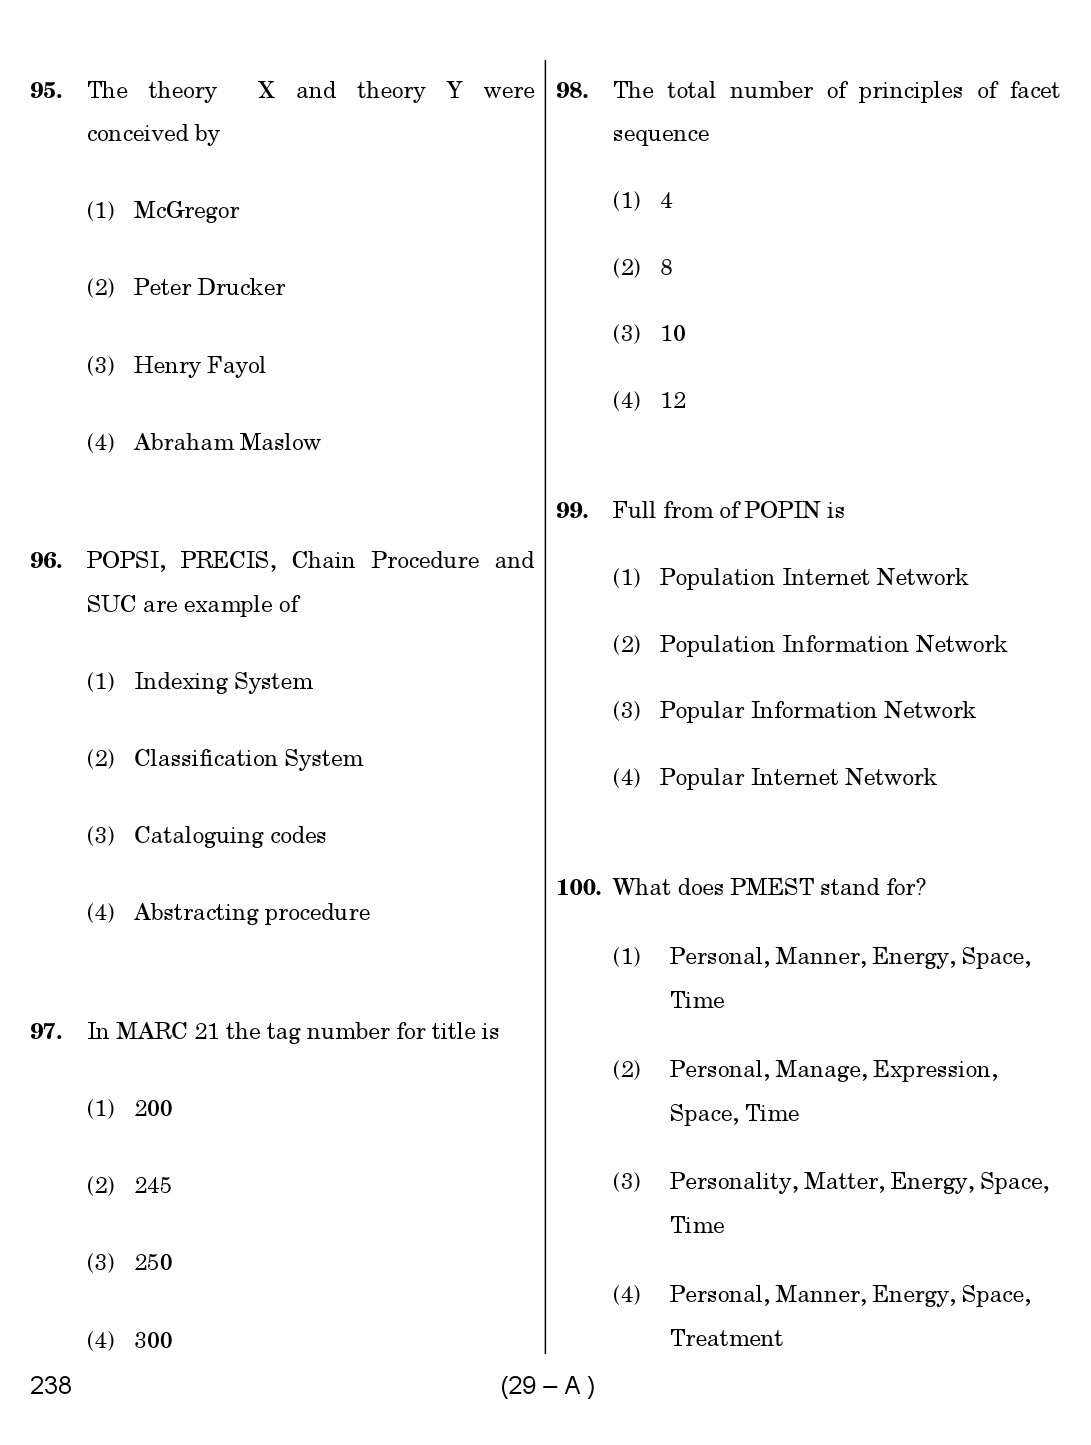 Karnataka PSC 238 Specific Paper II Librarian Exam Sample Question Paper 29